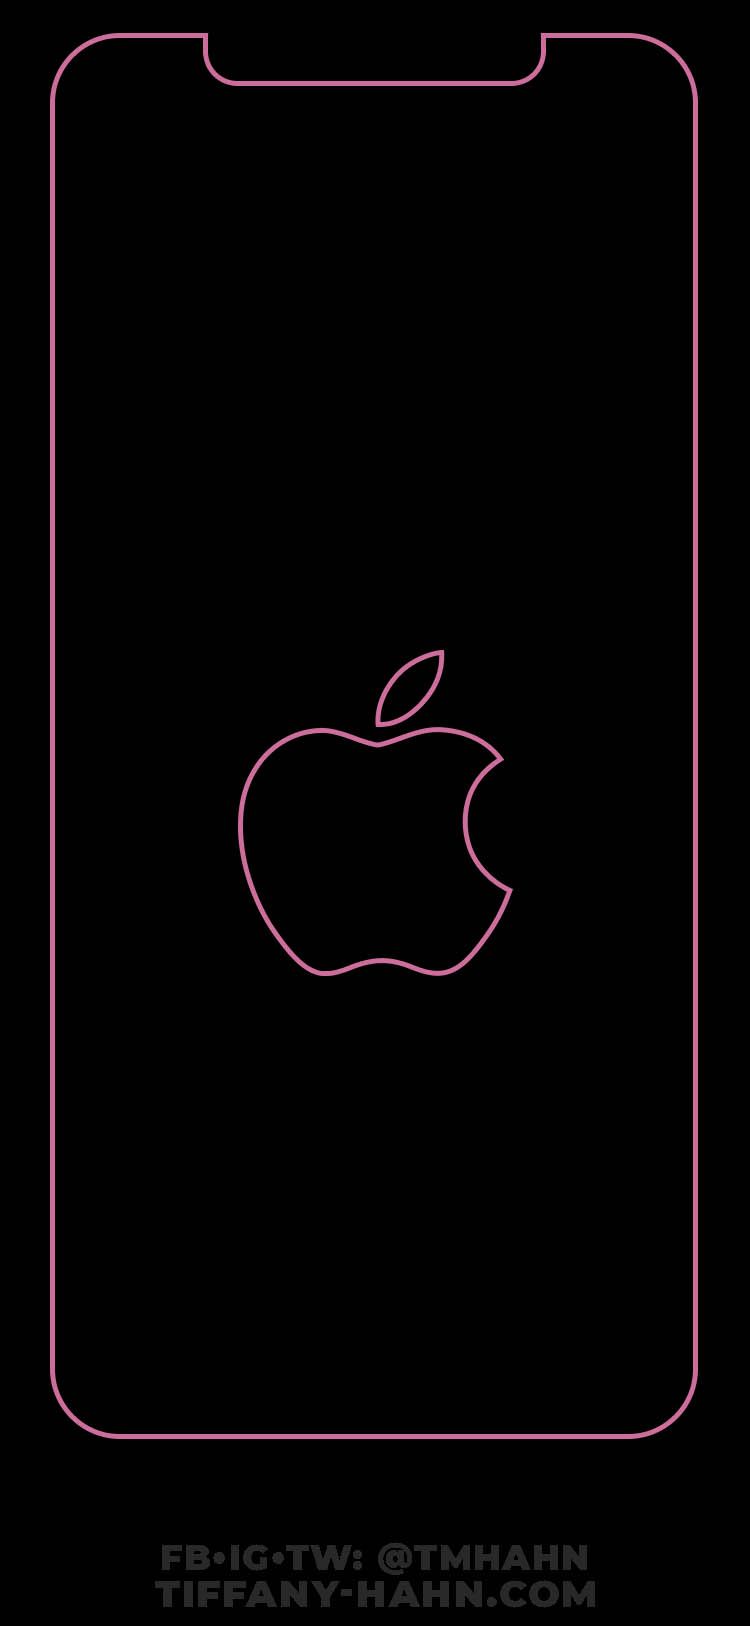 This wallpaper will perfectly fit the iPhone XS Max. The outline